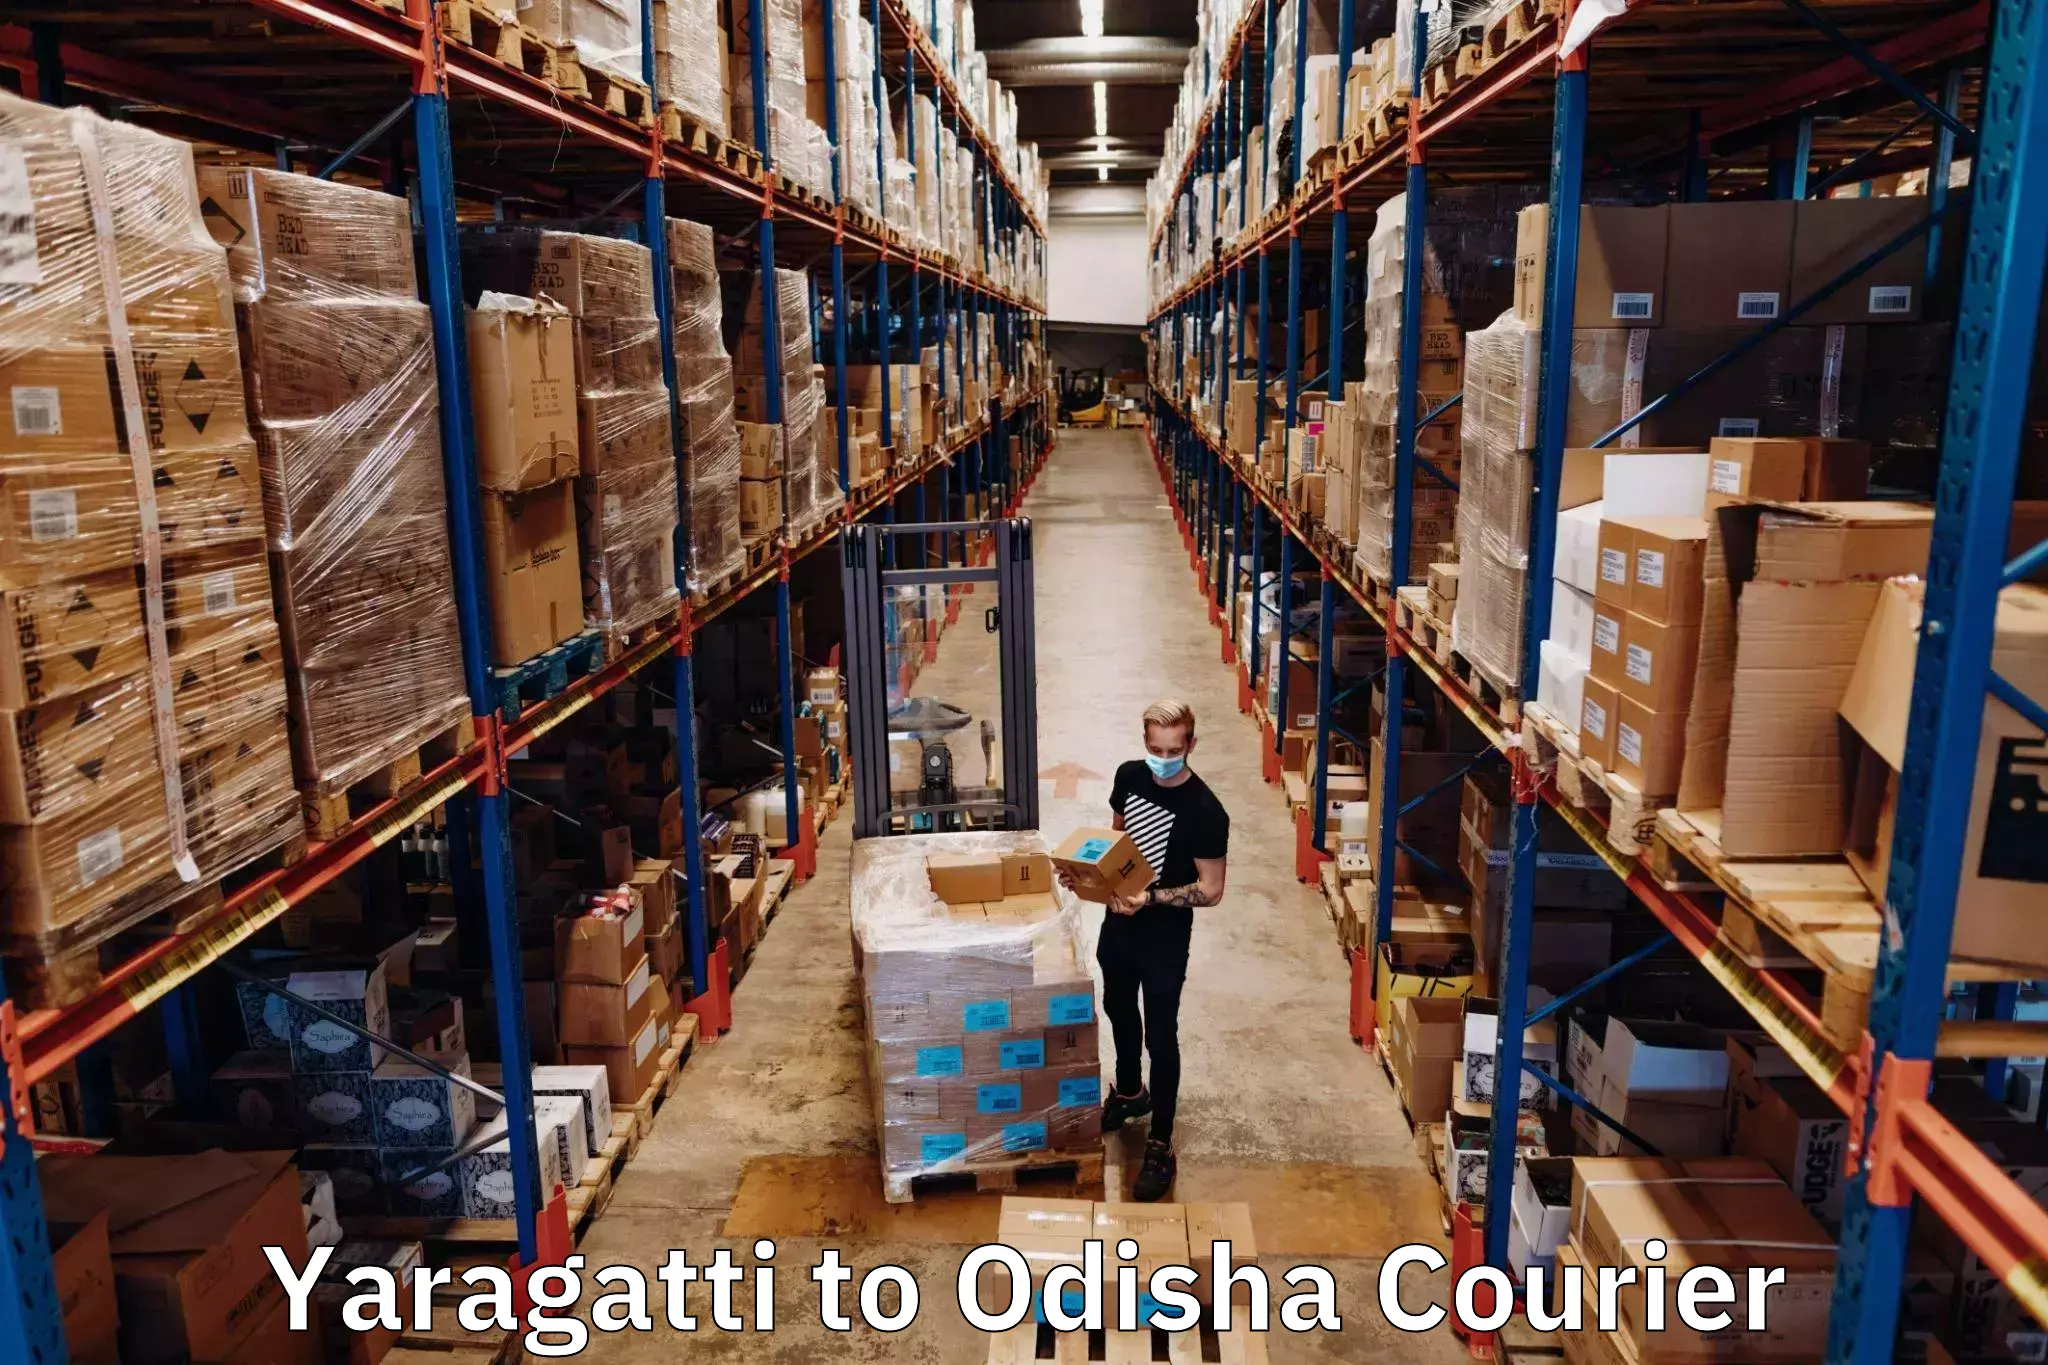 Reliable courier service in Yaragatti to Sambalpur